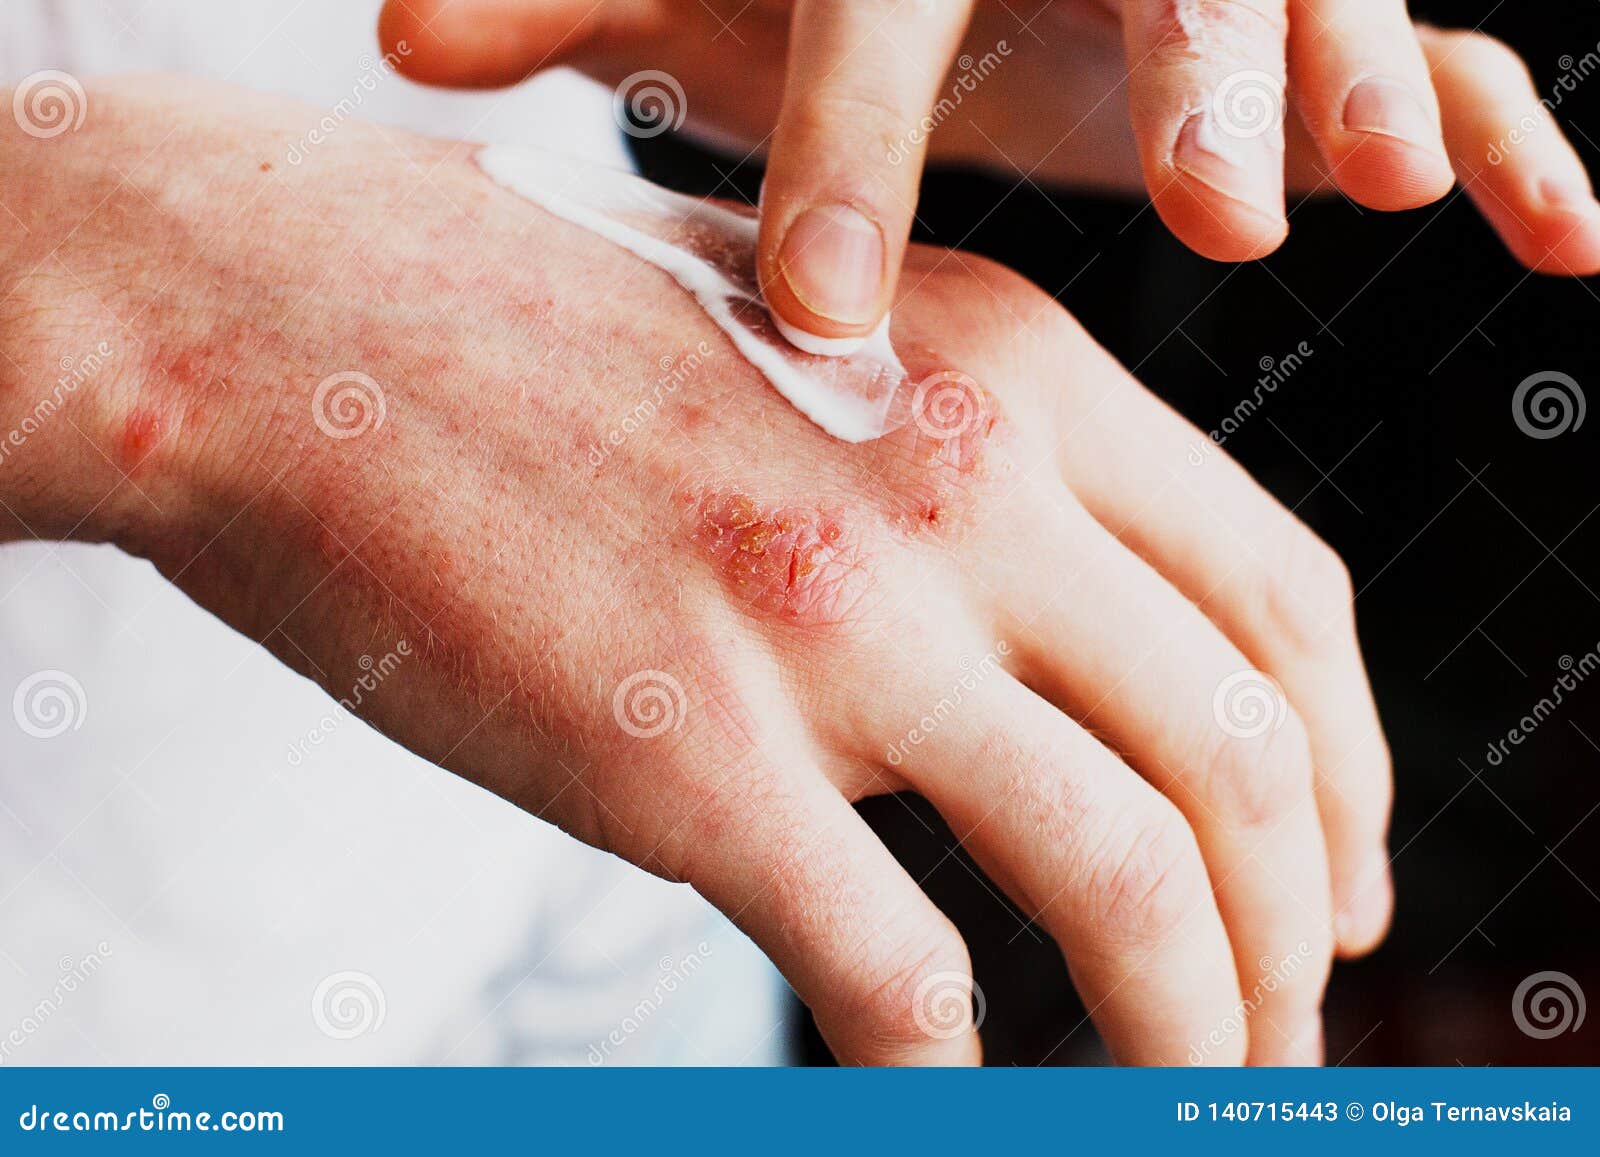 eczema on the hands. the man applying the ointment , creams in the treatment of eczema, psoriasis and other skin